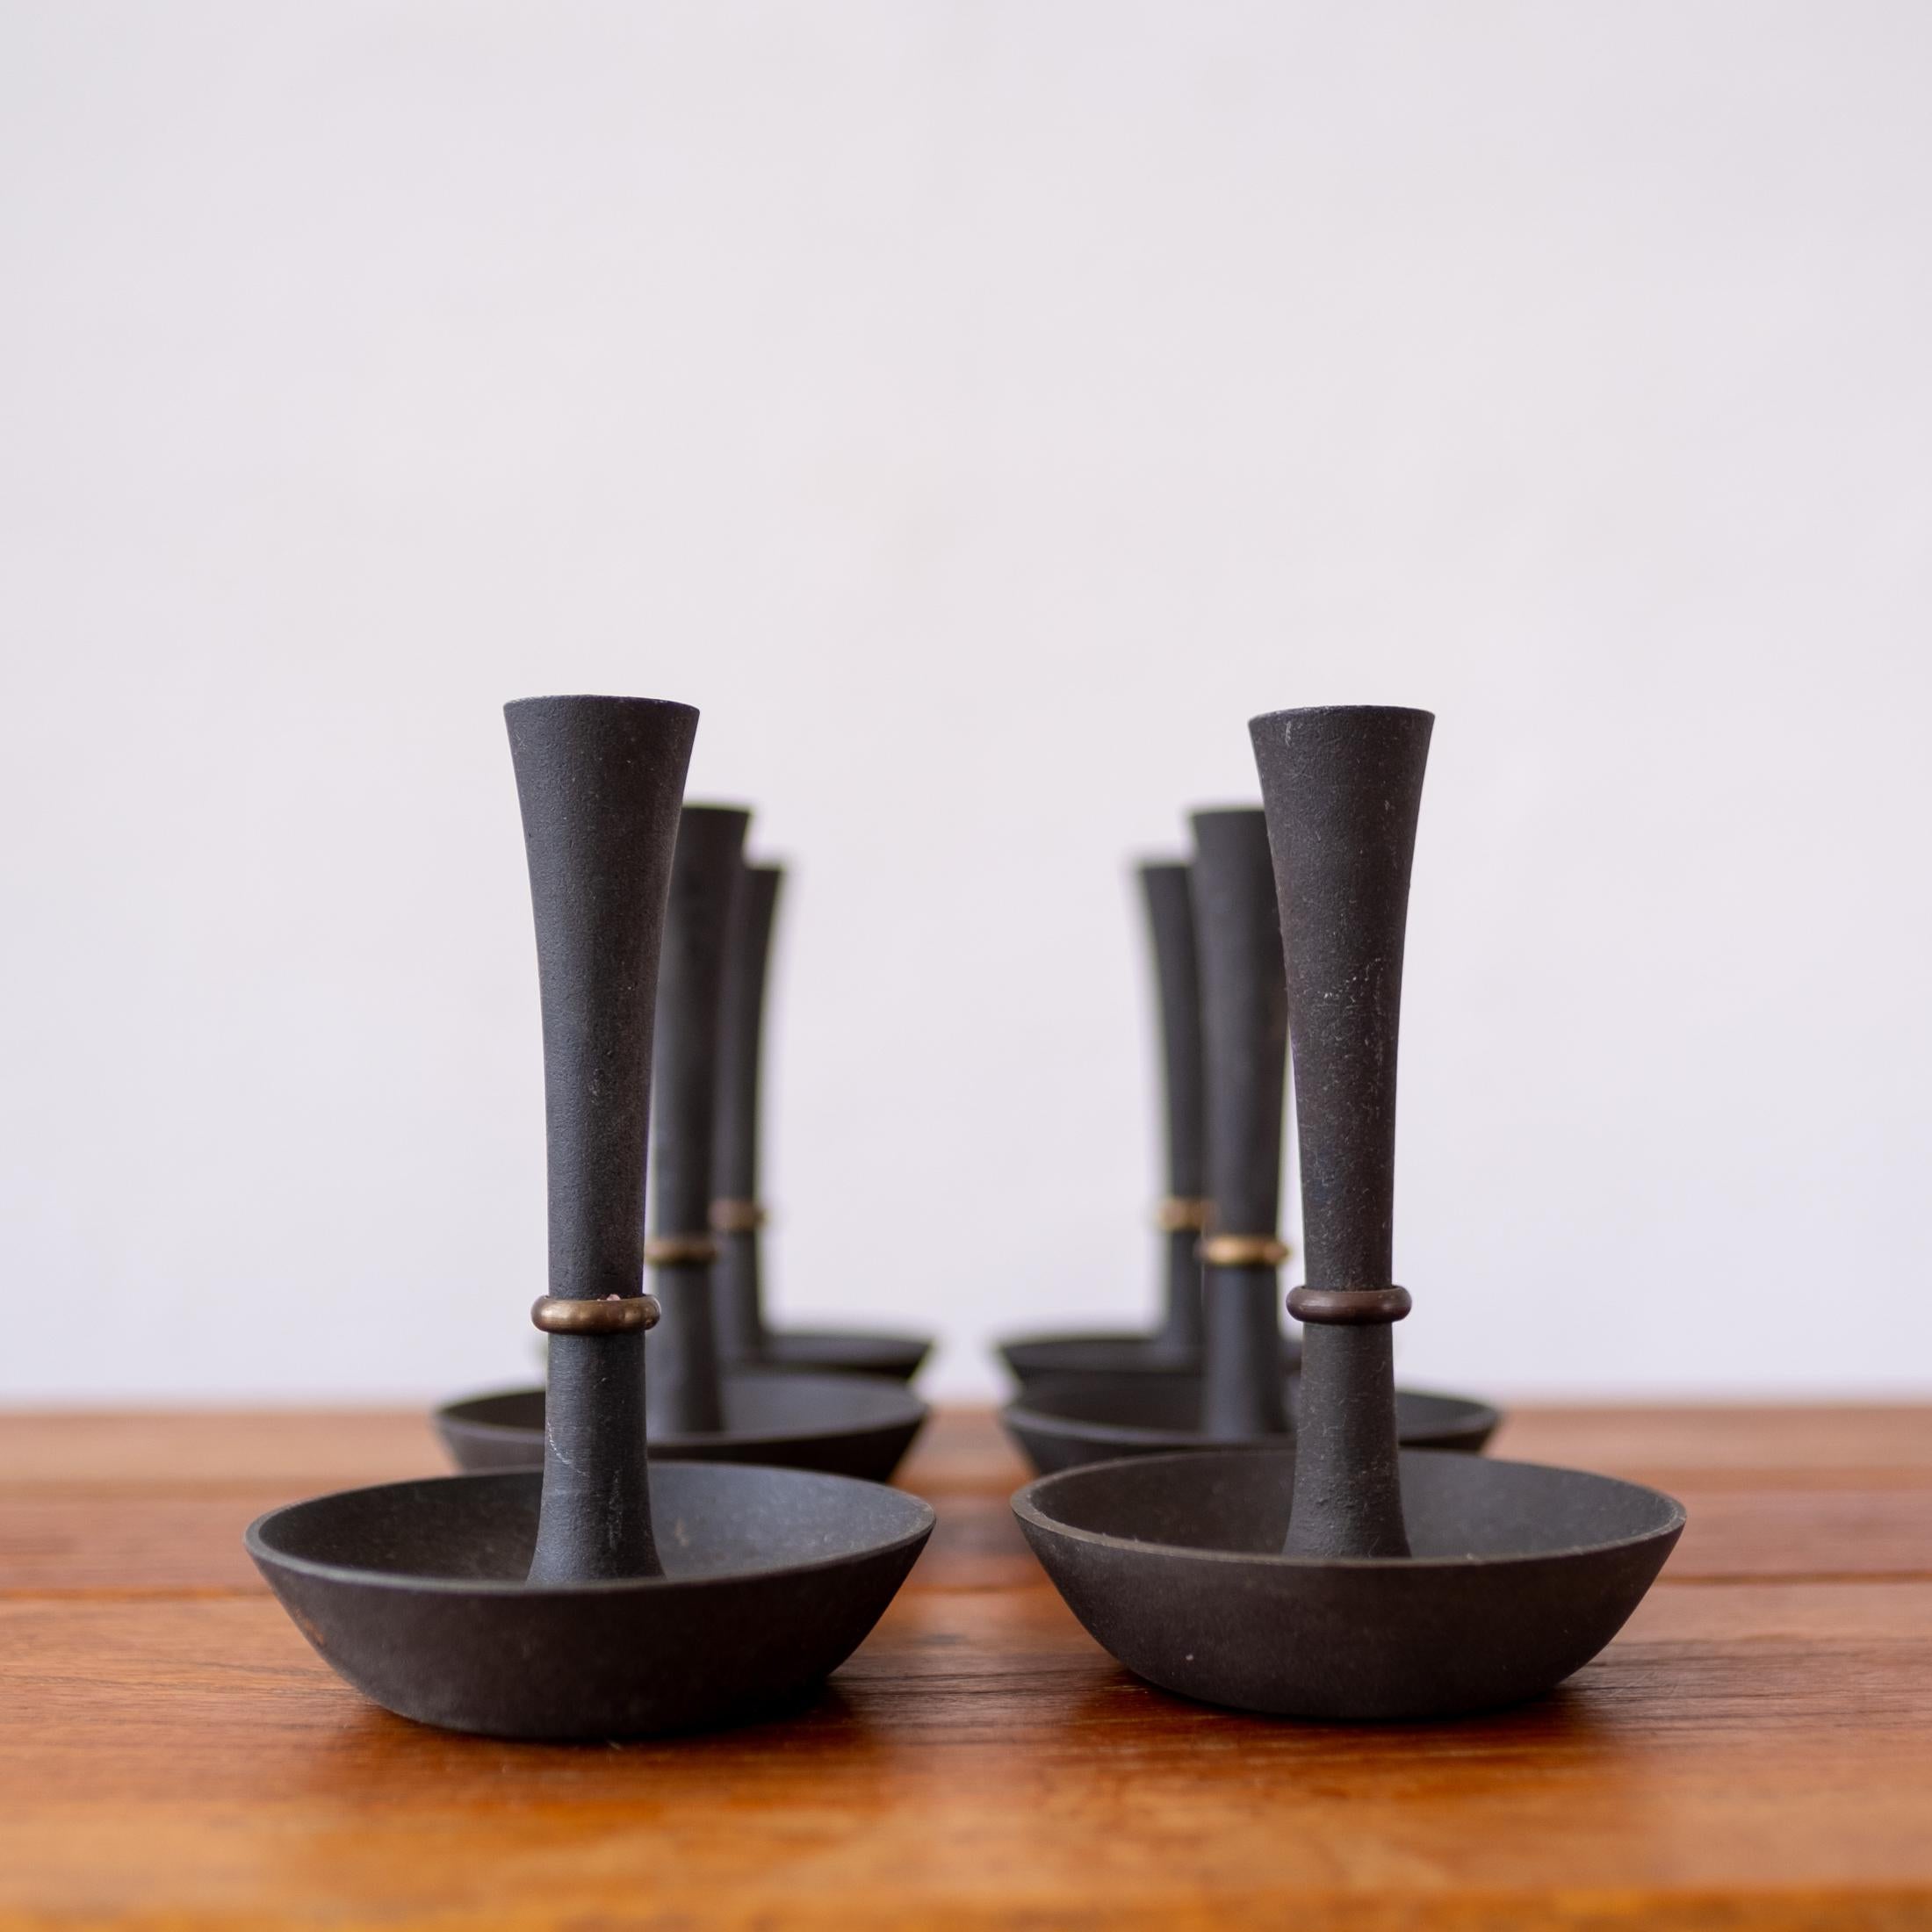 Dansk Iron and Brass Candle Holders by Jens Quistgaard 4